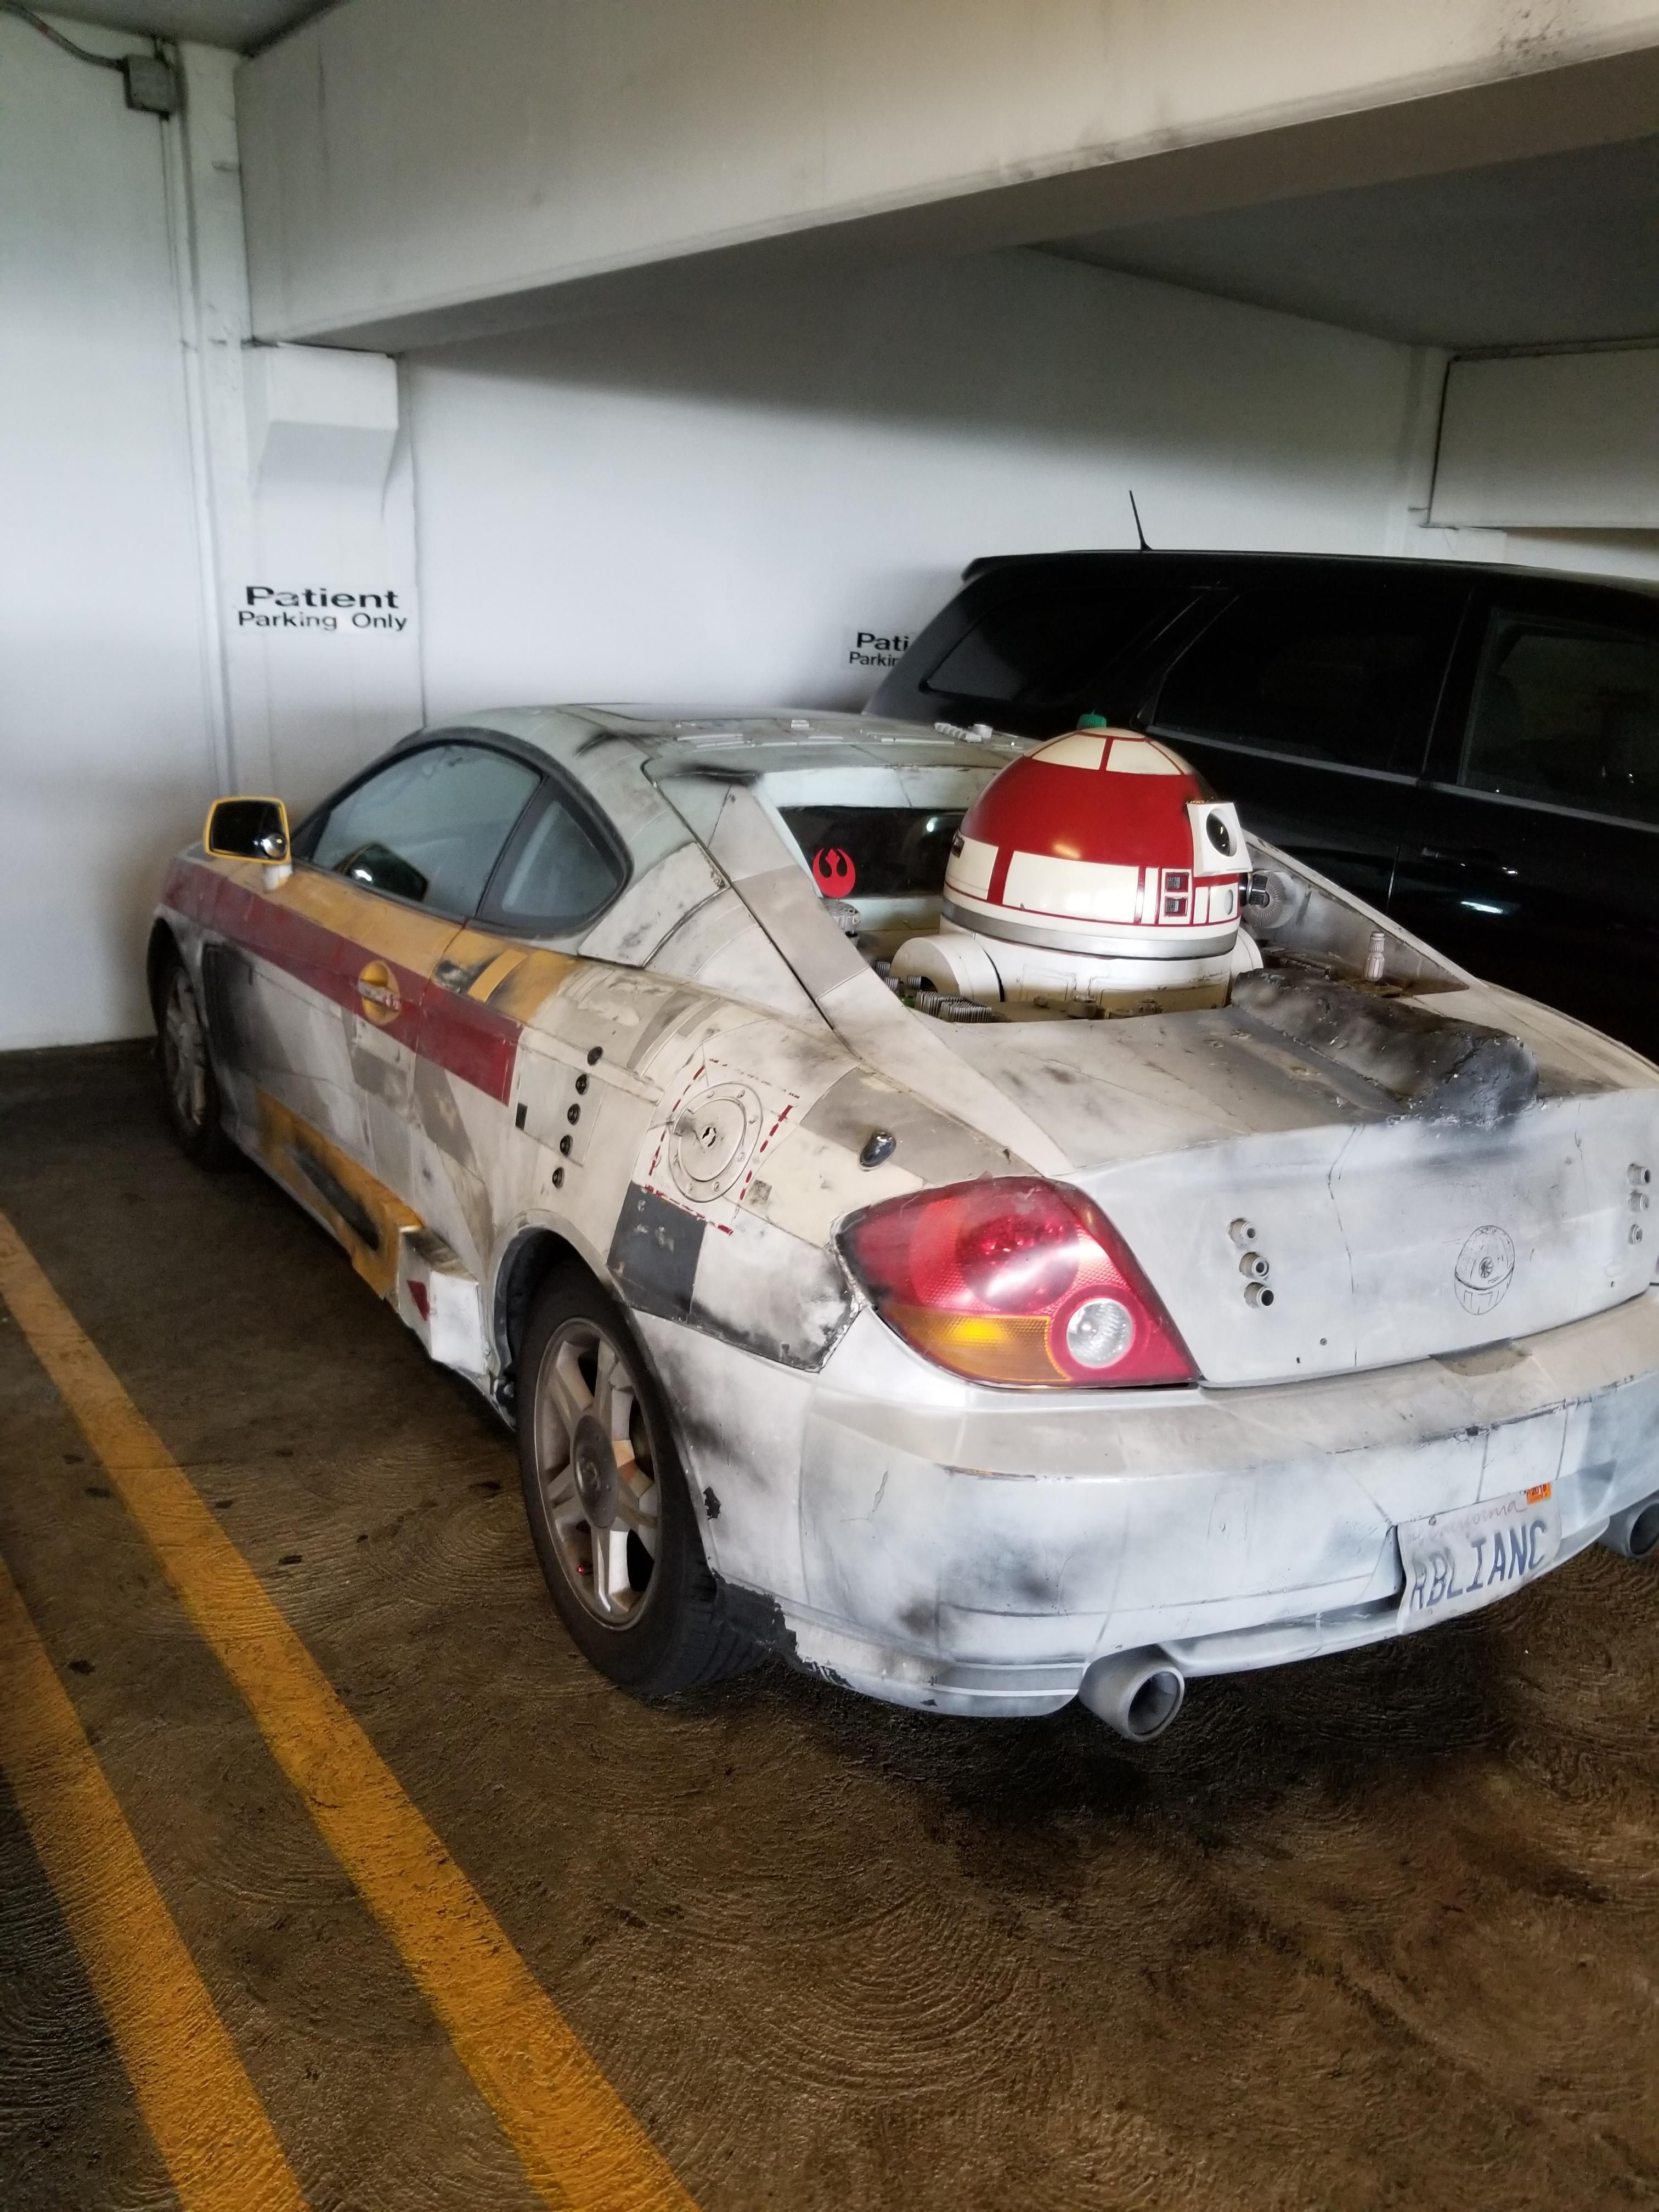 Car modded to look like an X-wing